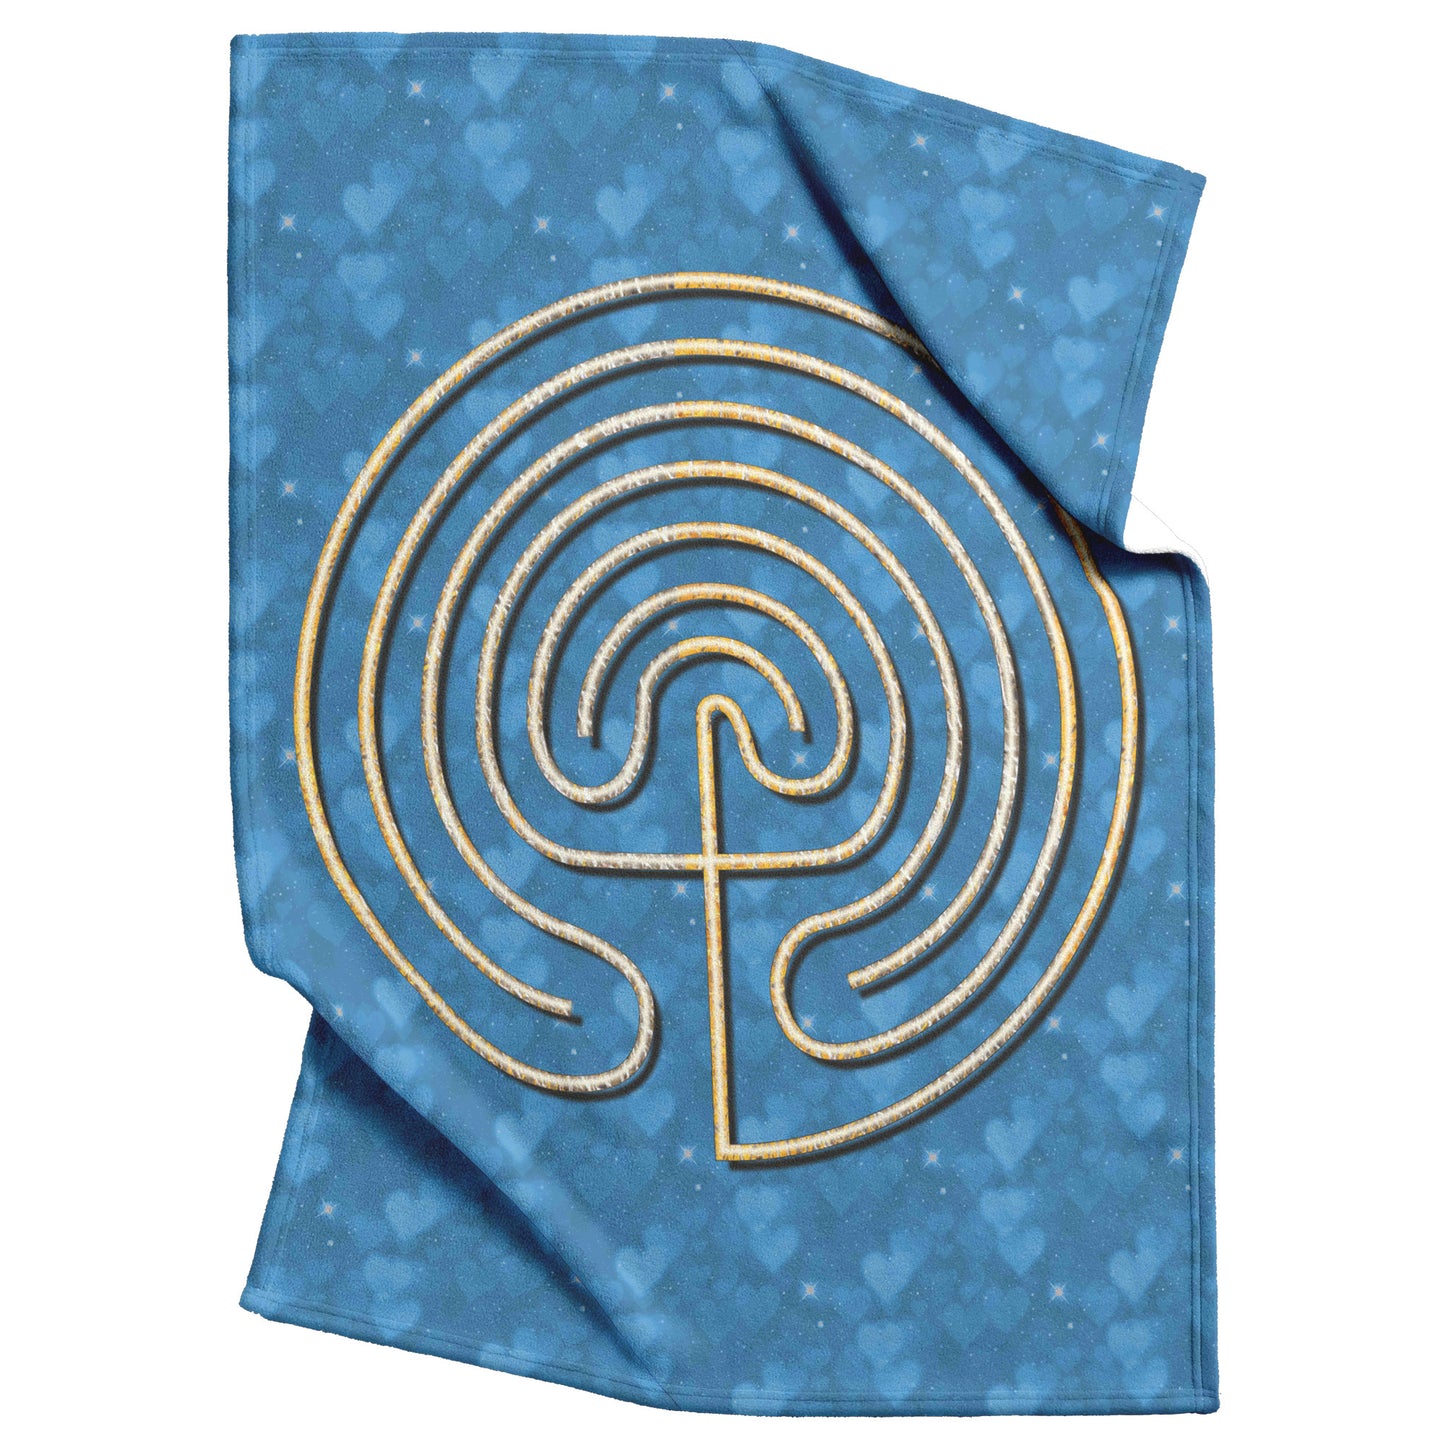 Cretian Labyrinth Therapy Blanket - Blue